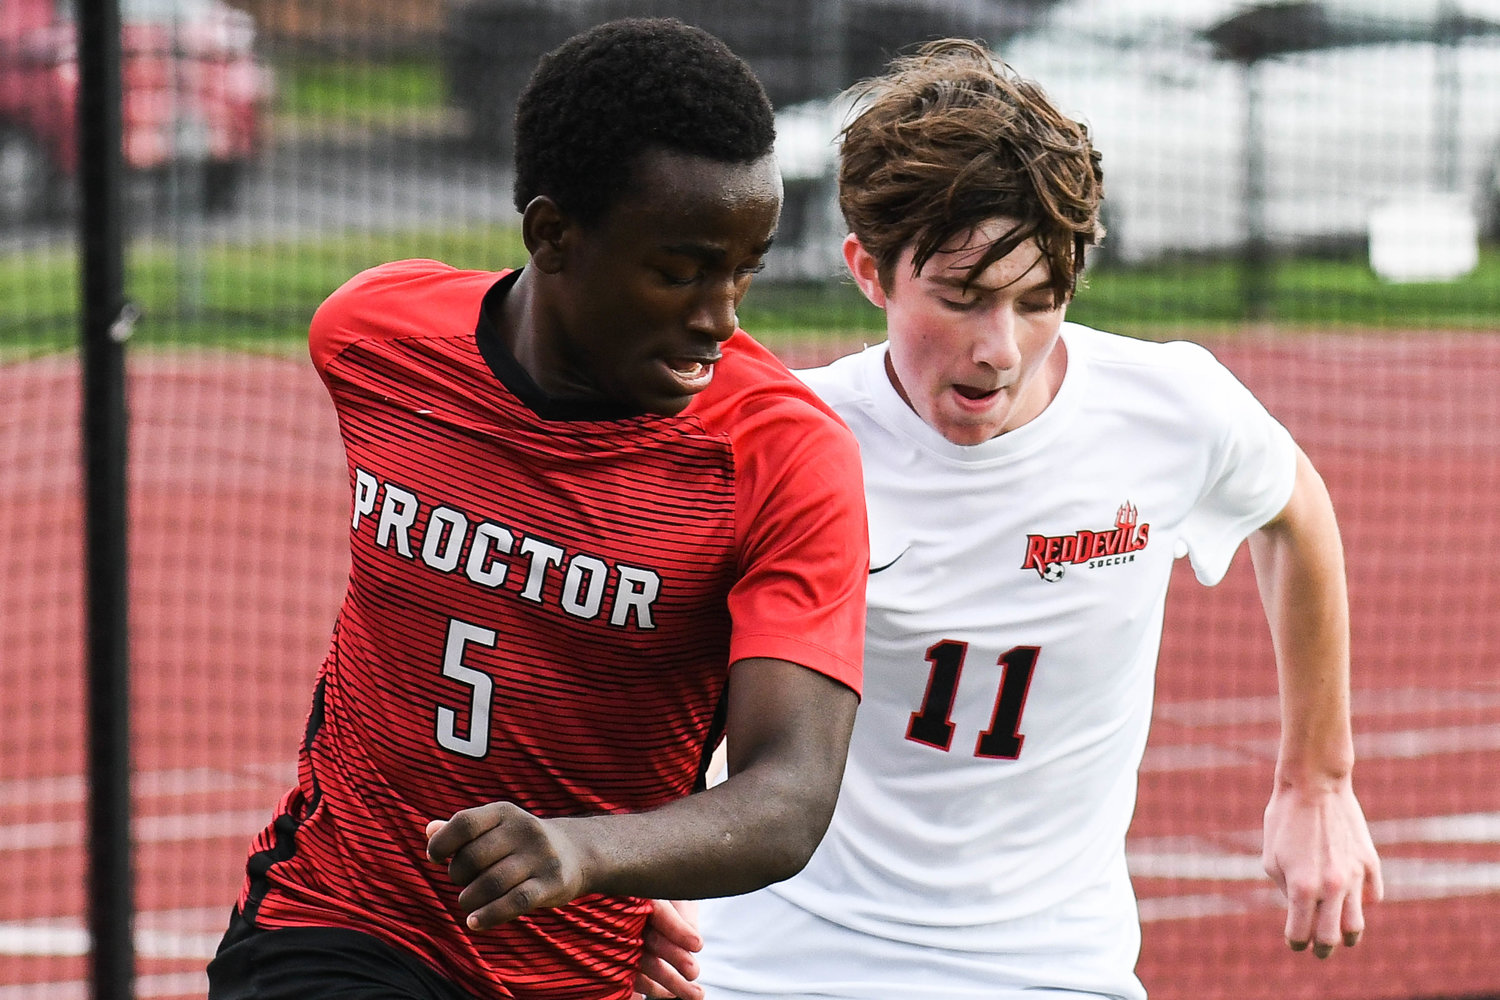 VVS player Nolan Miller (11) defends Proctor player Hussein Abukar (5) during the soccer game on Tuesday.